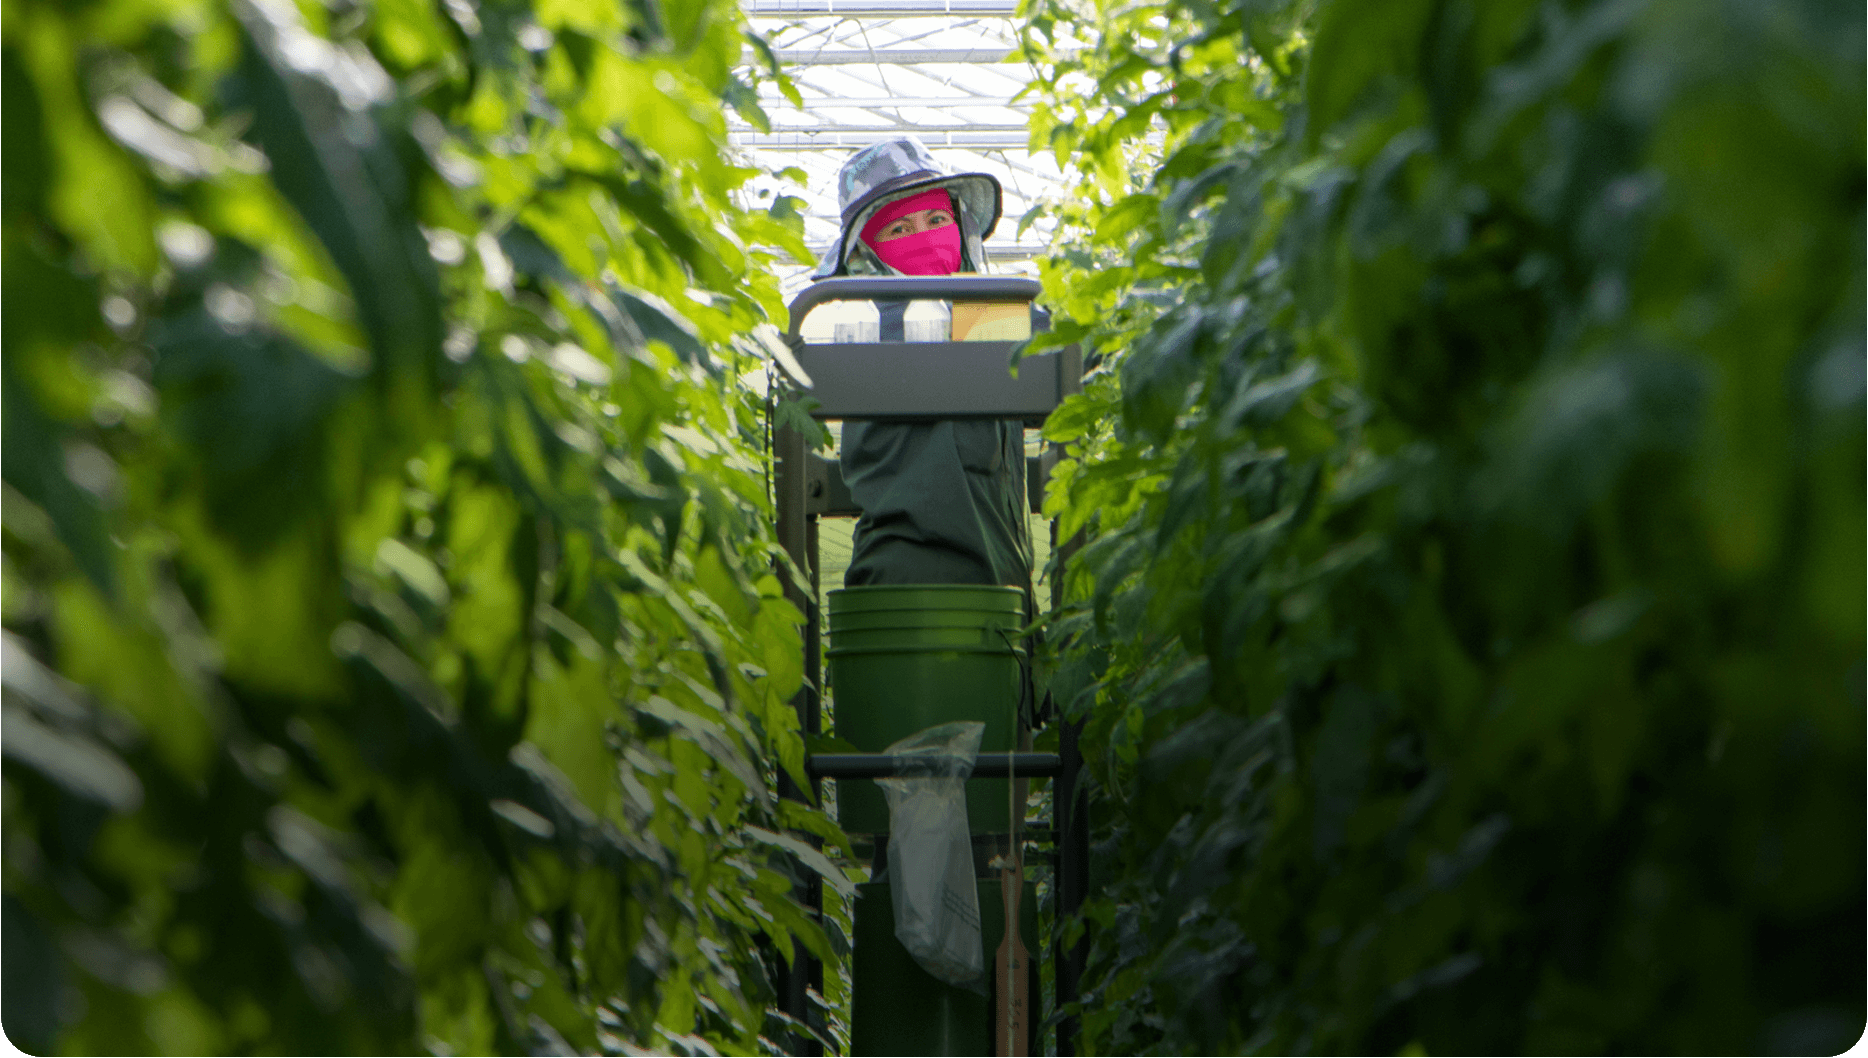 A worker on a platform in between rows of plants in a greenhouse